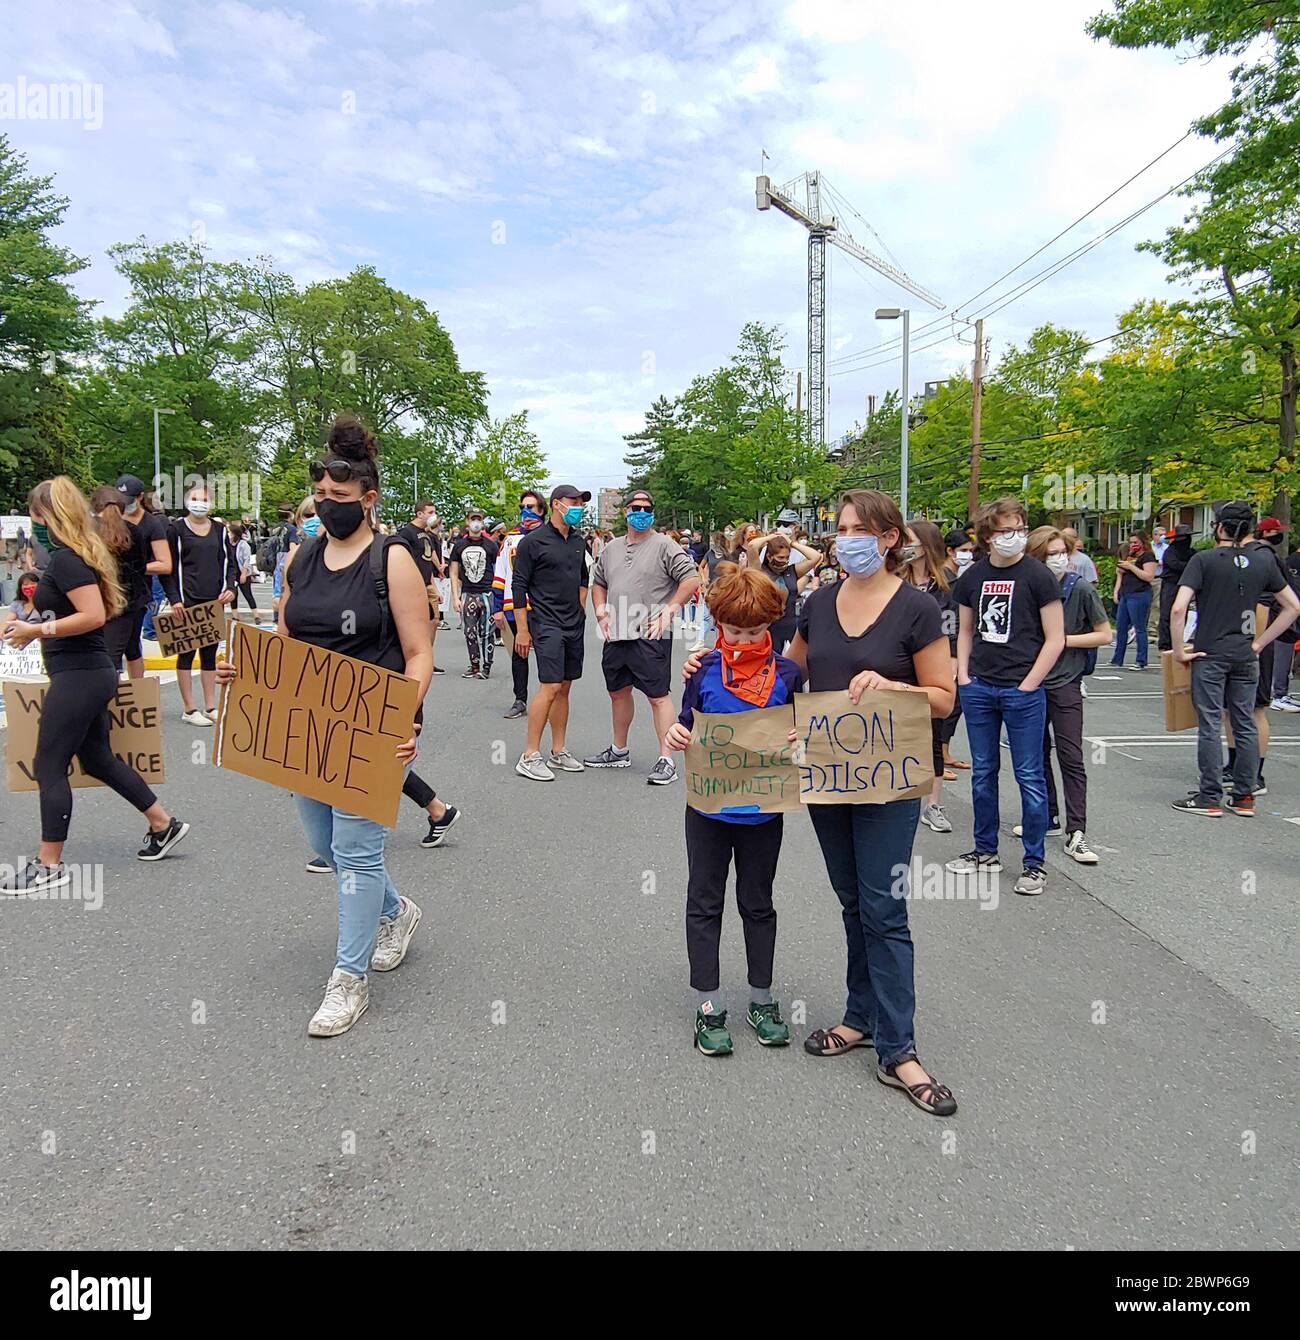 Bethesda,MD, June 2, 2020,USA: A rally organized by high school students brought thousands of  protestors gather in Bethesda, MD, a suburb near Washin Stock Photo